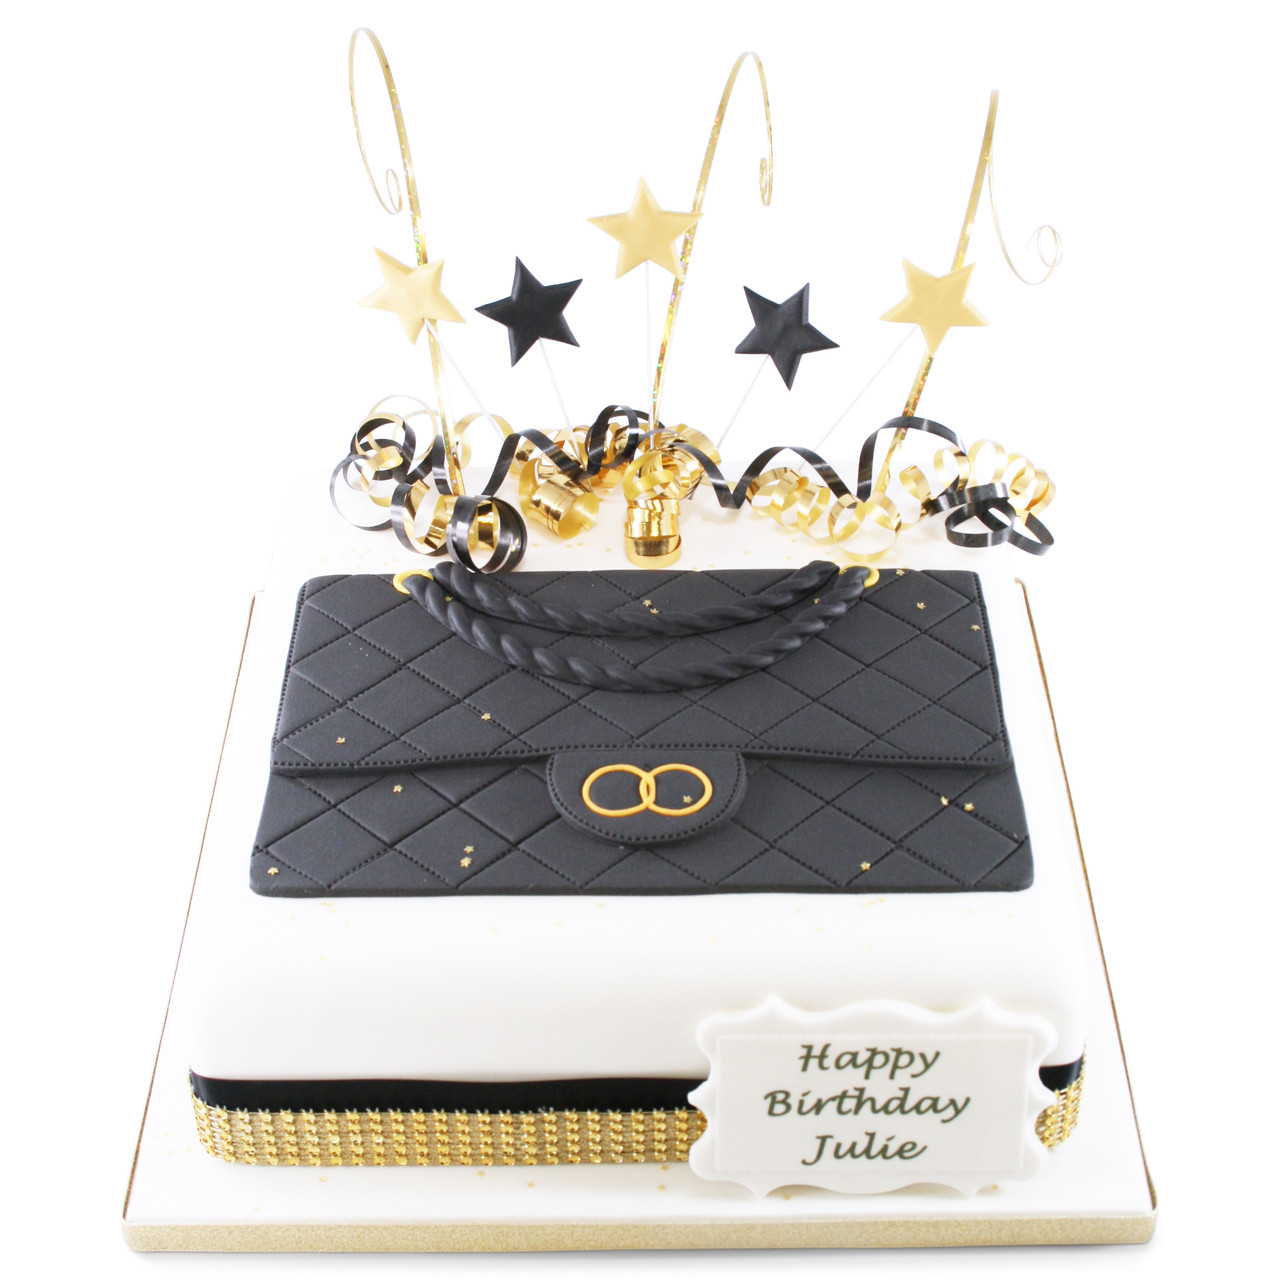 LADY DIOR Purse Cake - Decorated Cake by Violet - The - CakesDecor